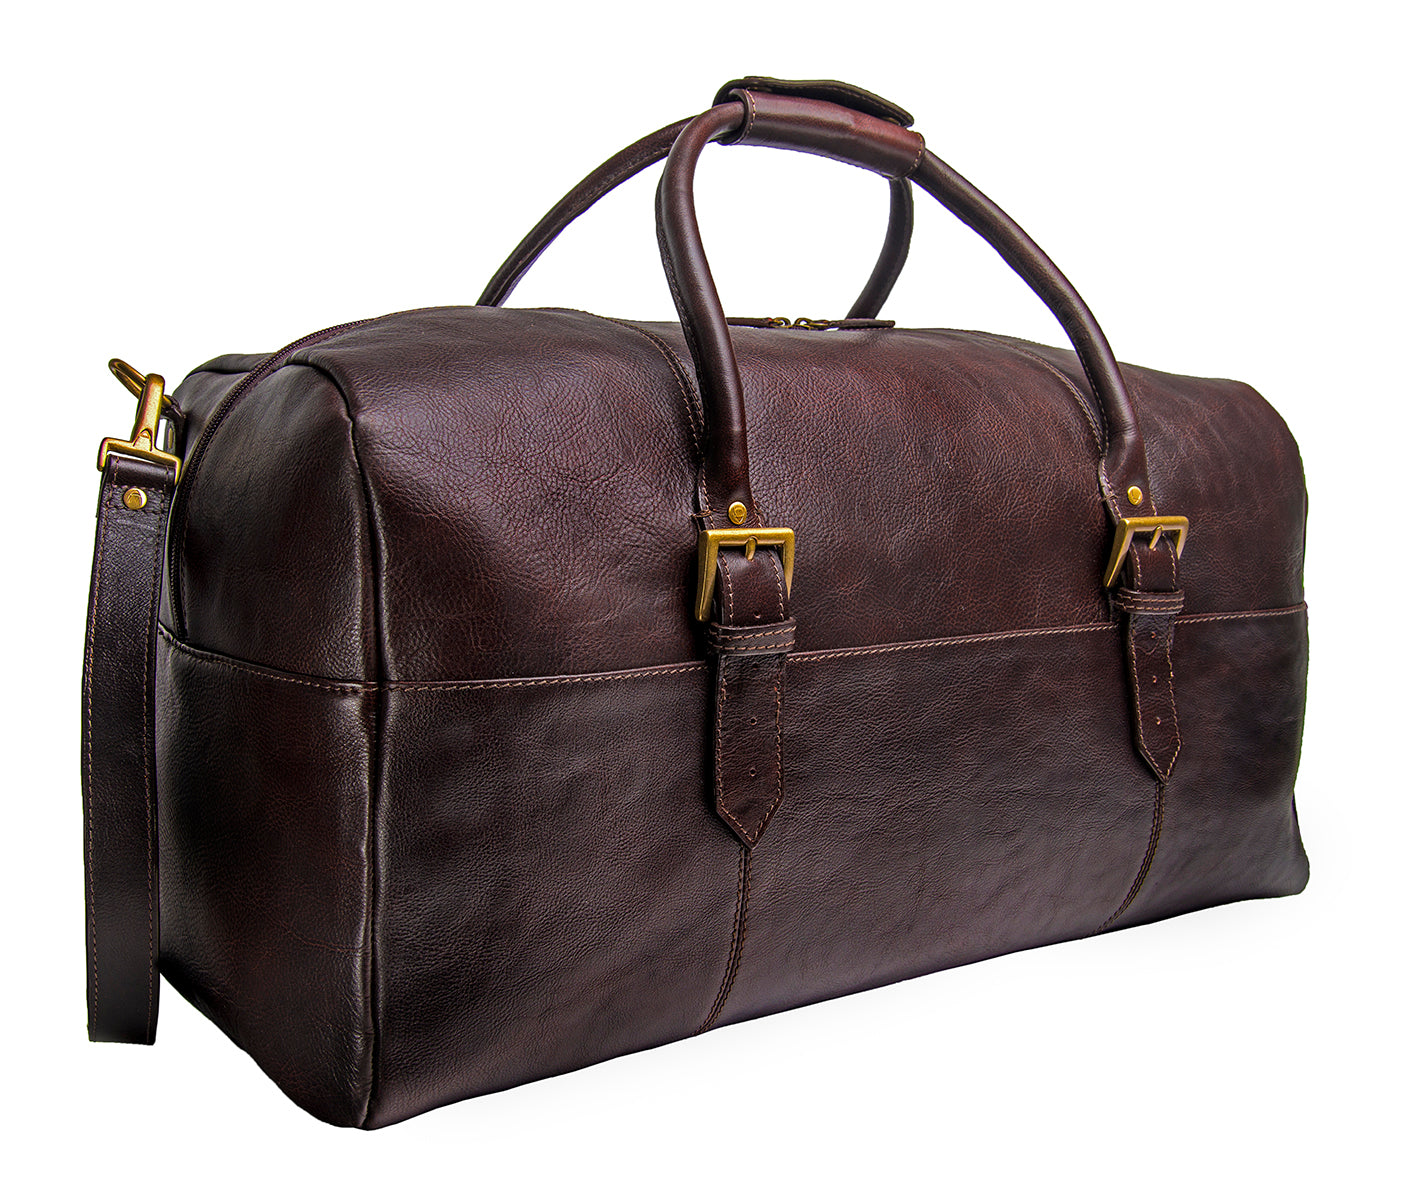 Hidesign Charles Leather Cabin Travel Duffle Weekend Bag - Mercantile Mountain